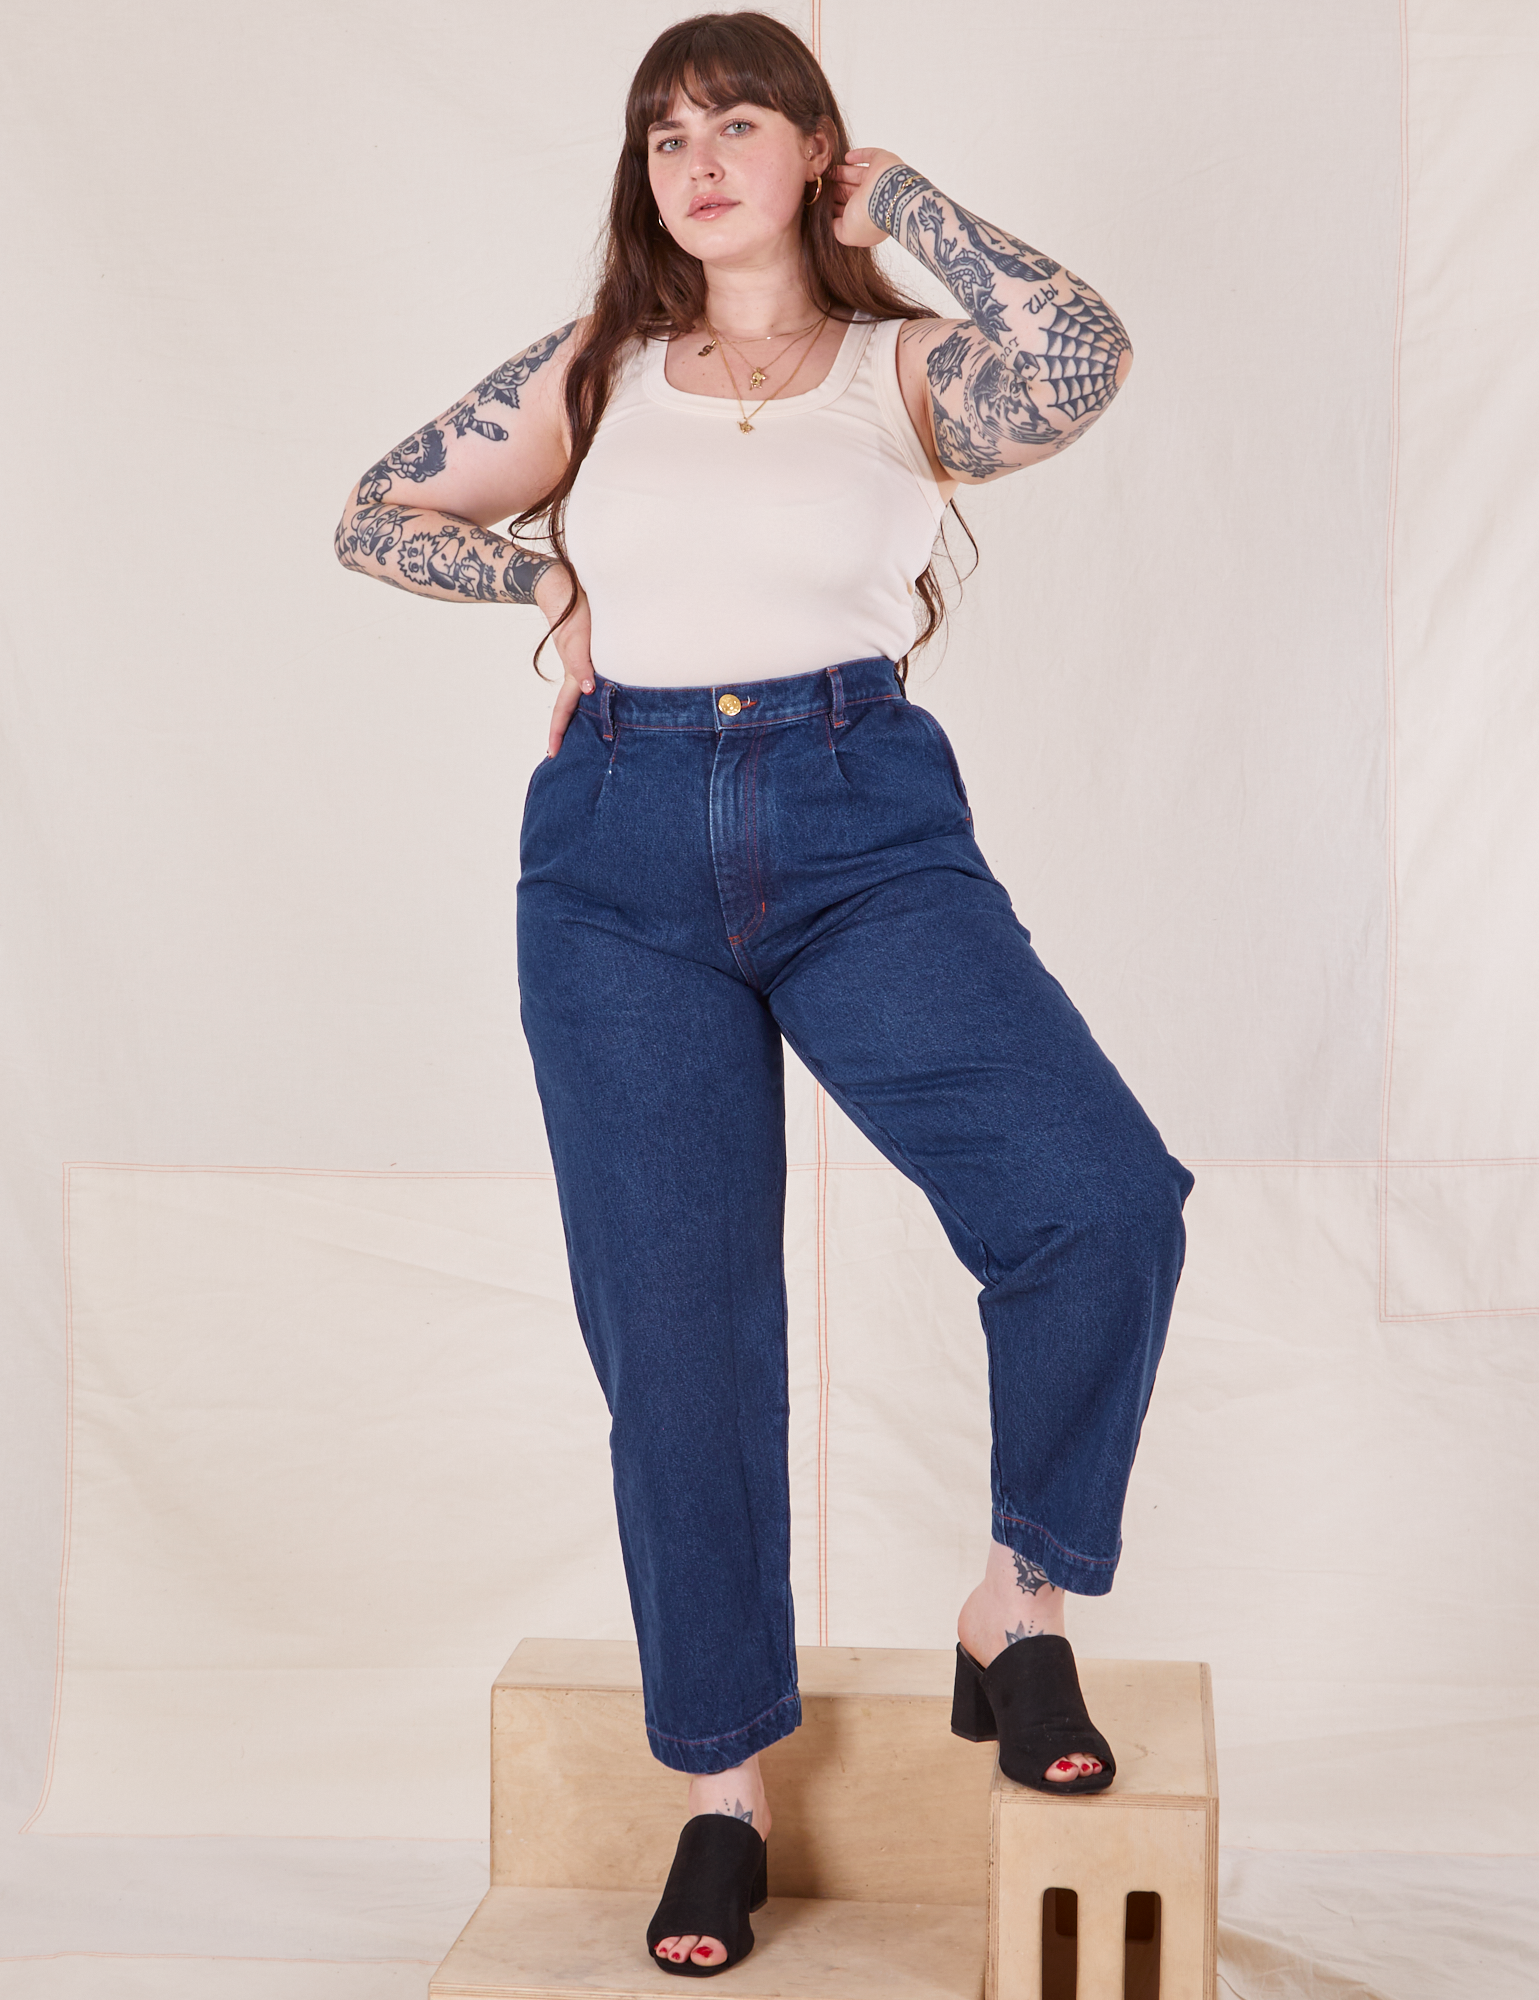 Sydney is 5&#39;9&quot; and wearing M Denim Trouser Jeans in Dark Wash paired with Tank Top in vintage Tee off-white